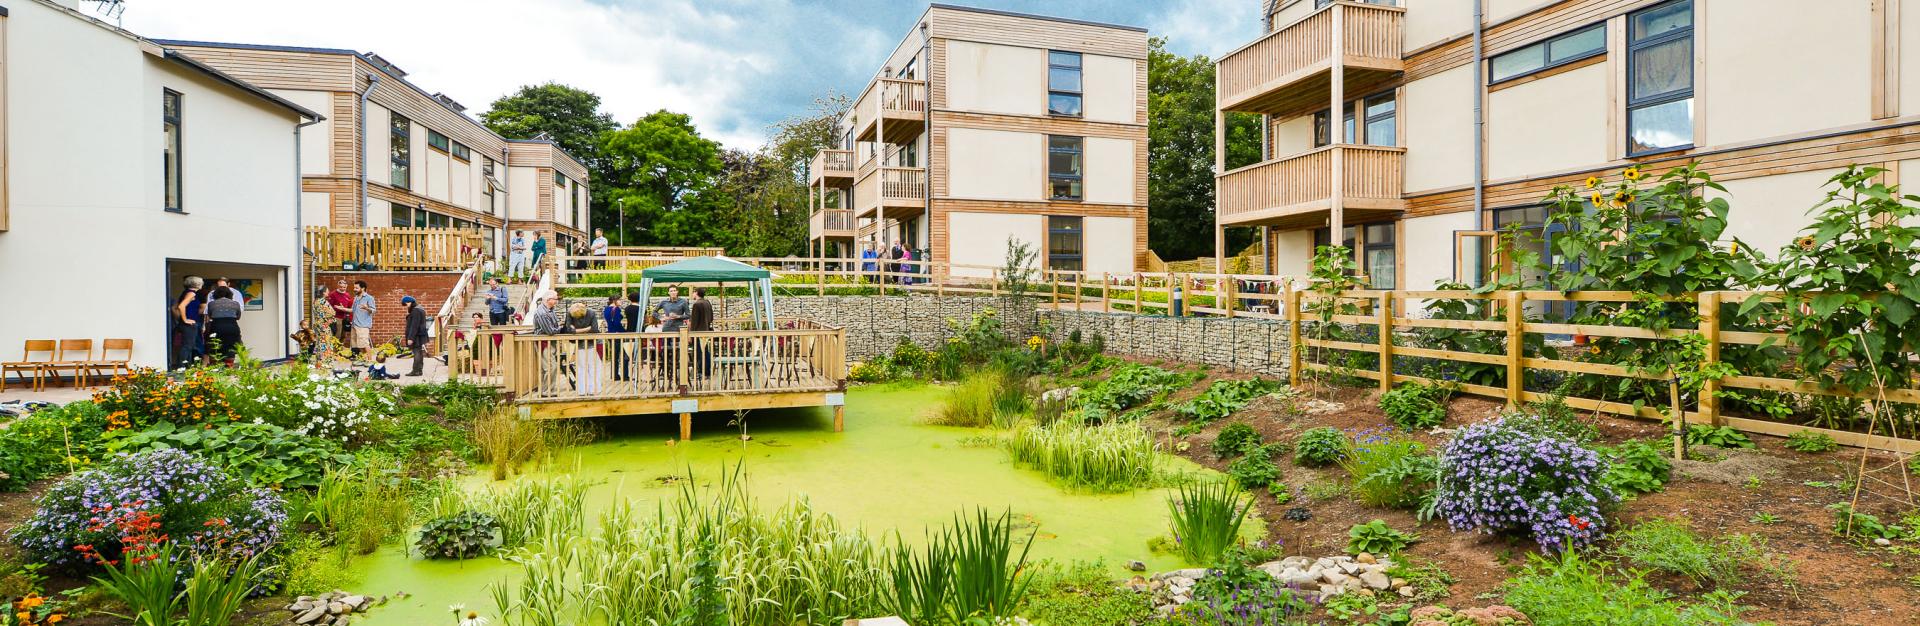 LILAC Cohousing in Leeds